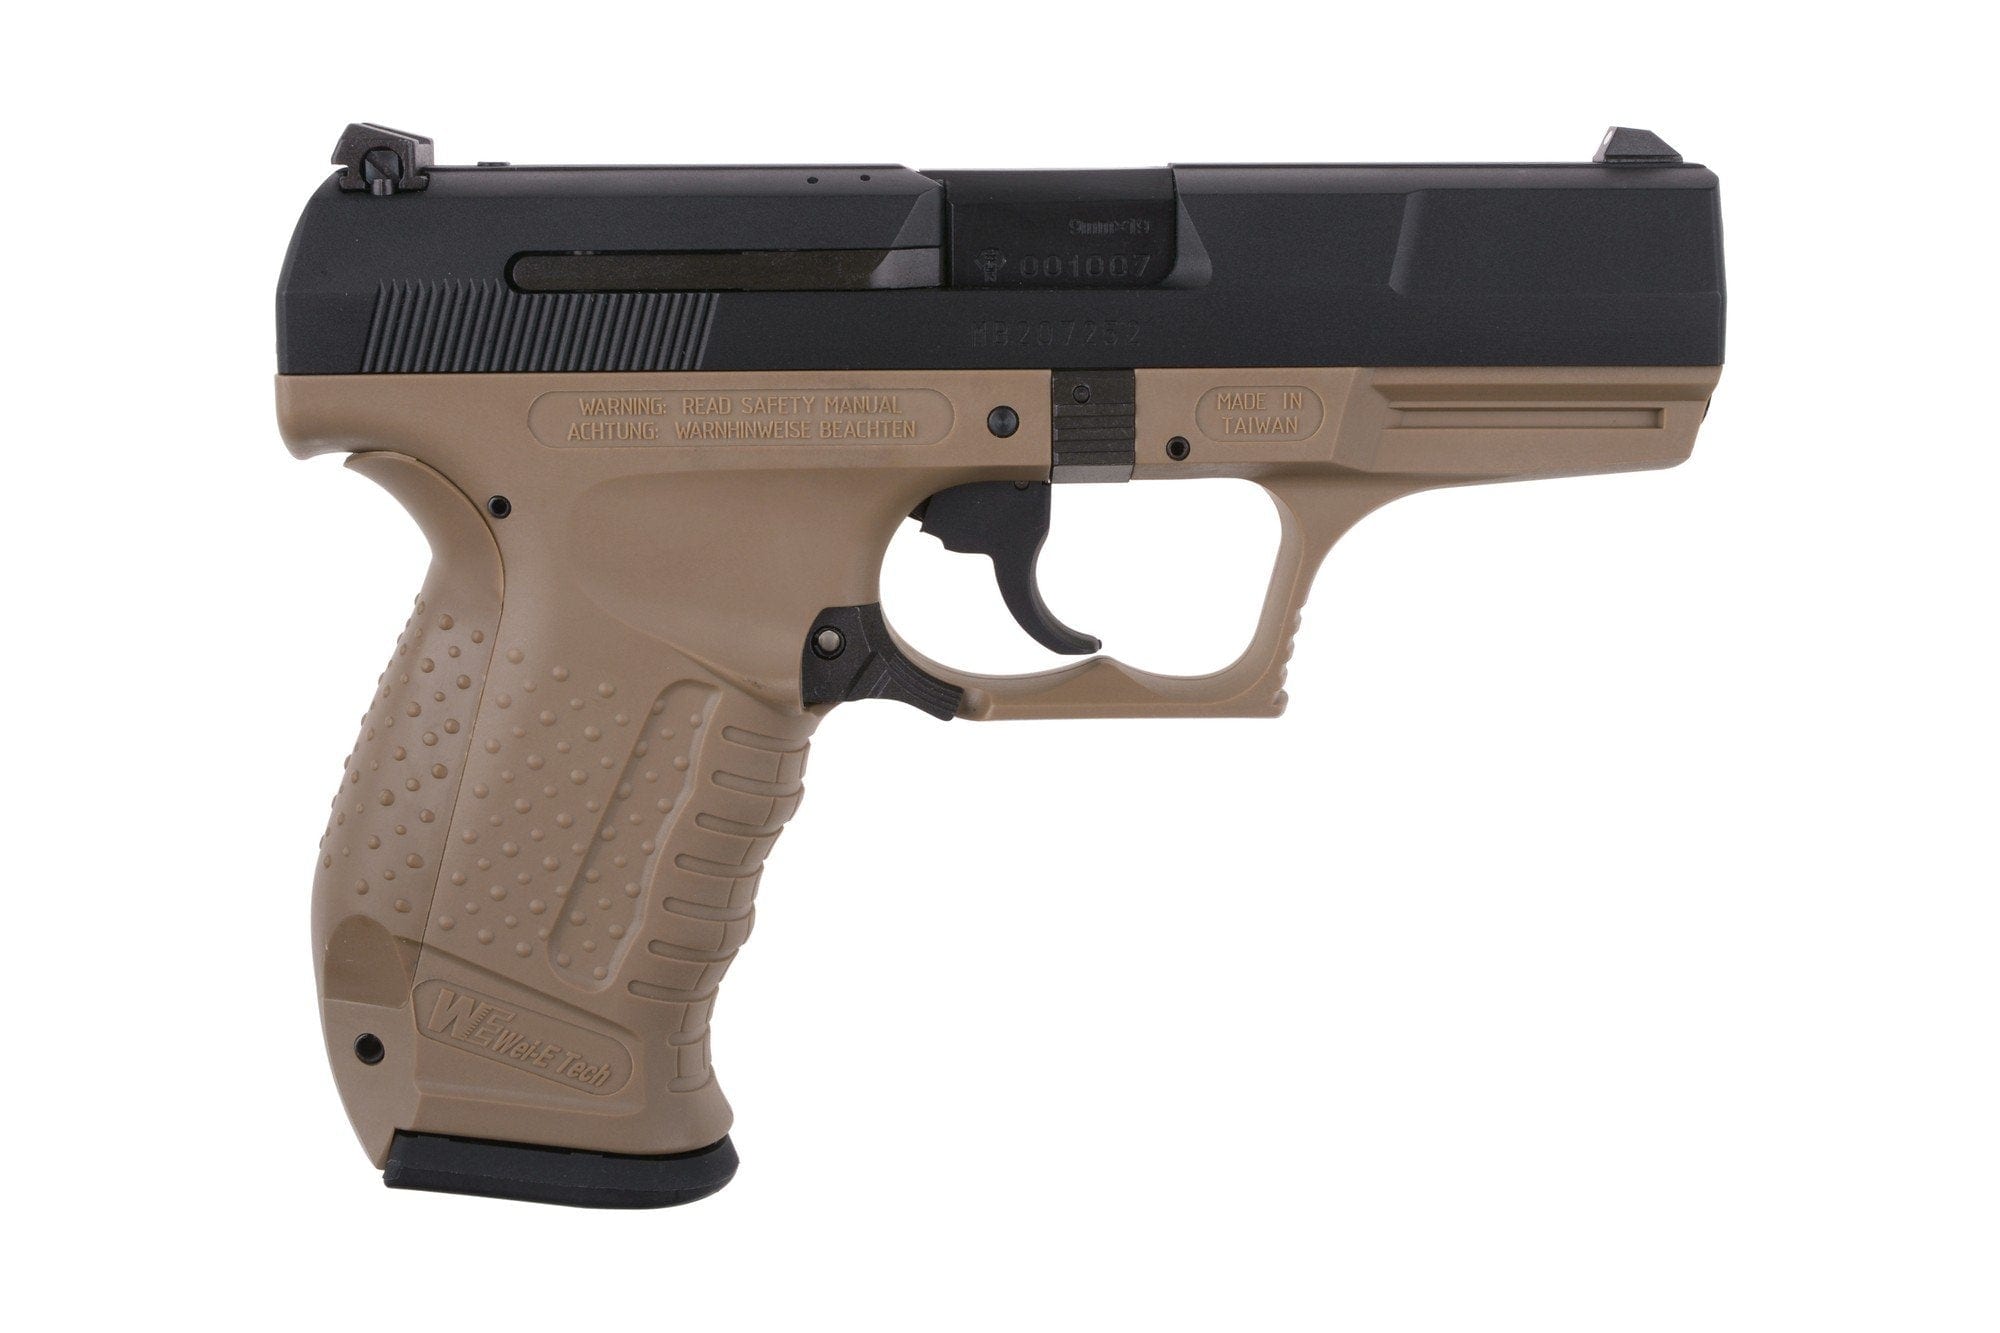 E99 Pistol Replica - Tan by WE on Airsoft Mania Europe